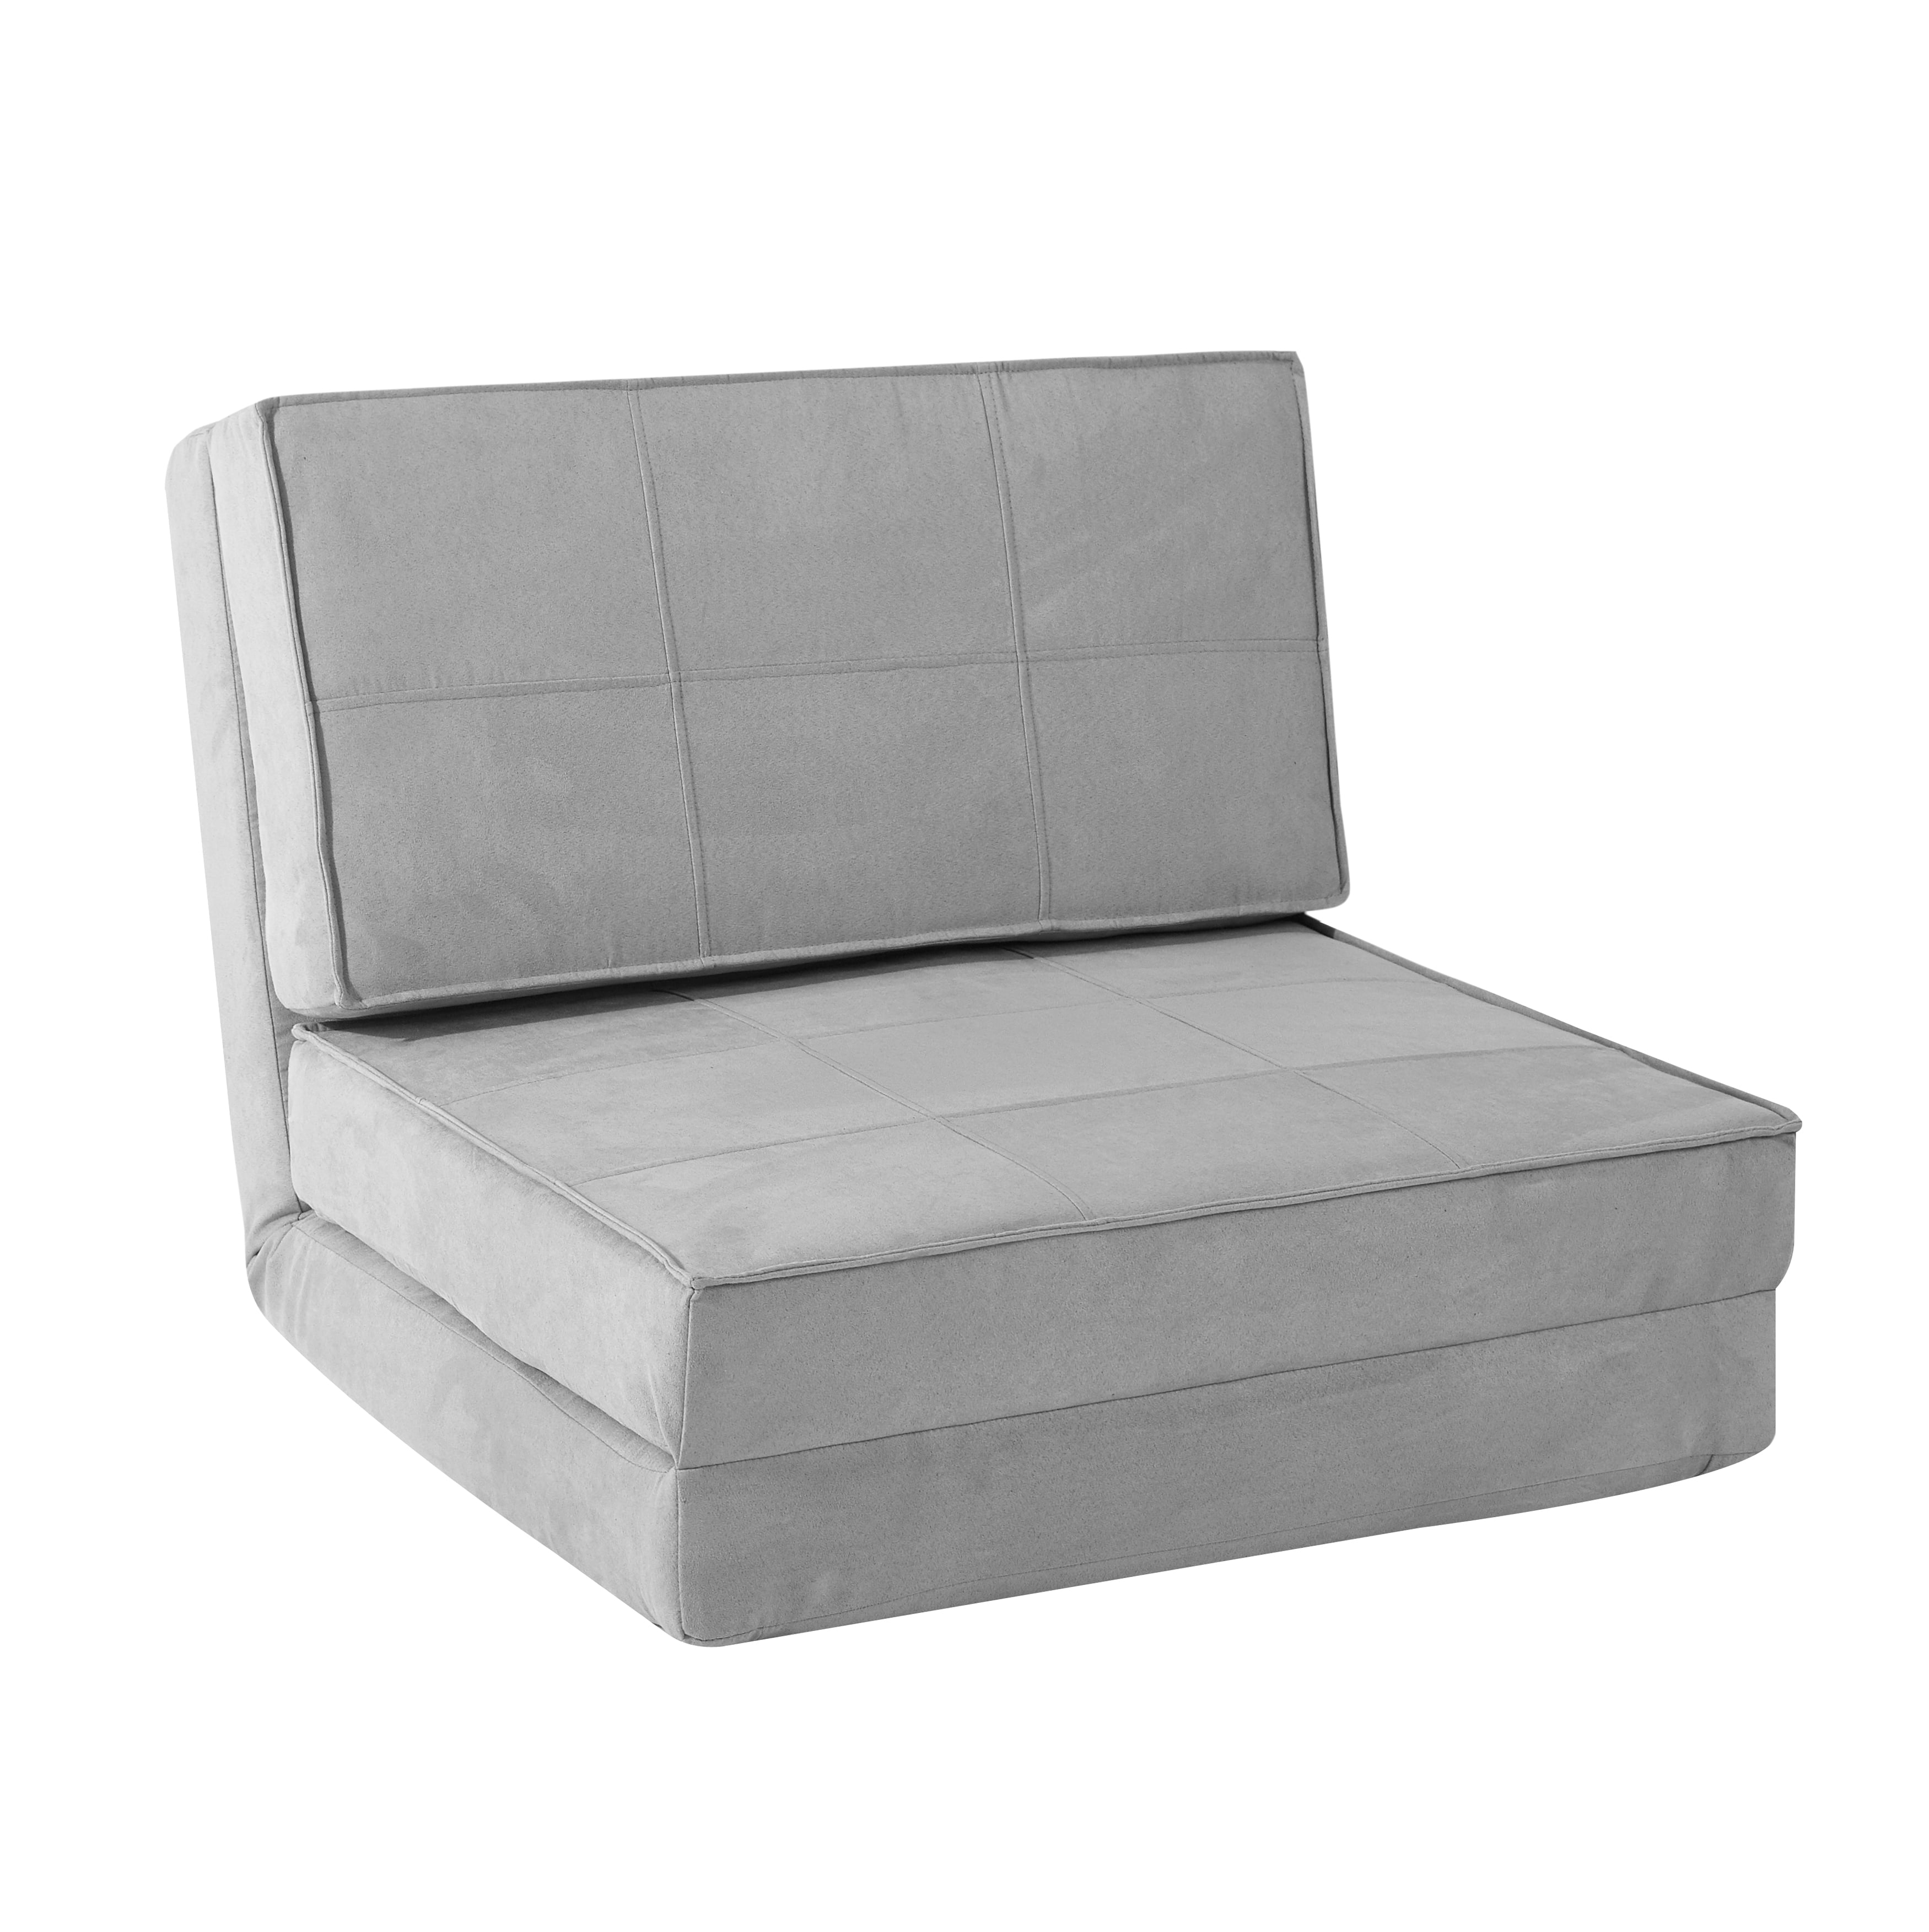 Details about   Ultra Soft 3 Position Convertible Flip CHAIR BED High Quality 2 Day Delivery 